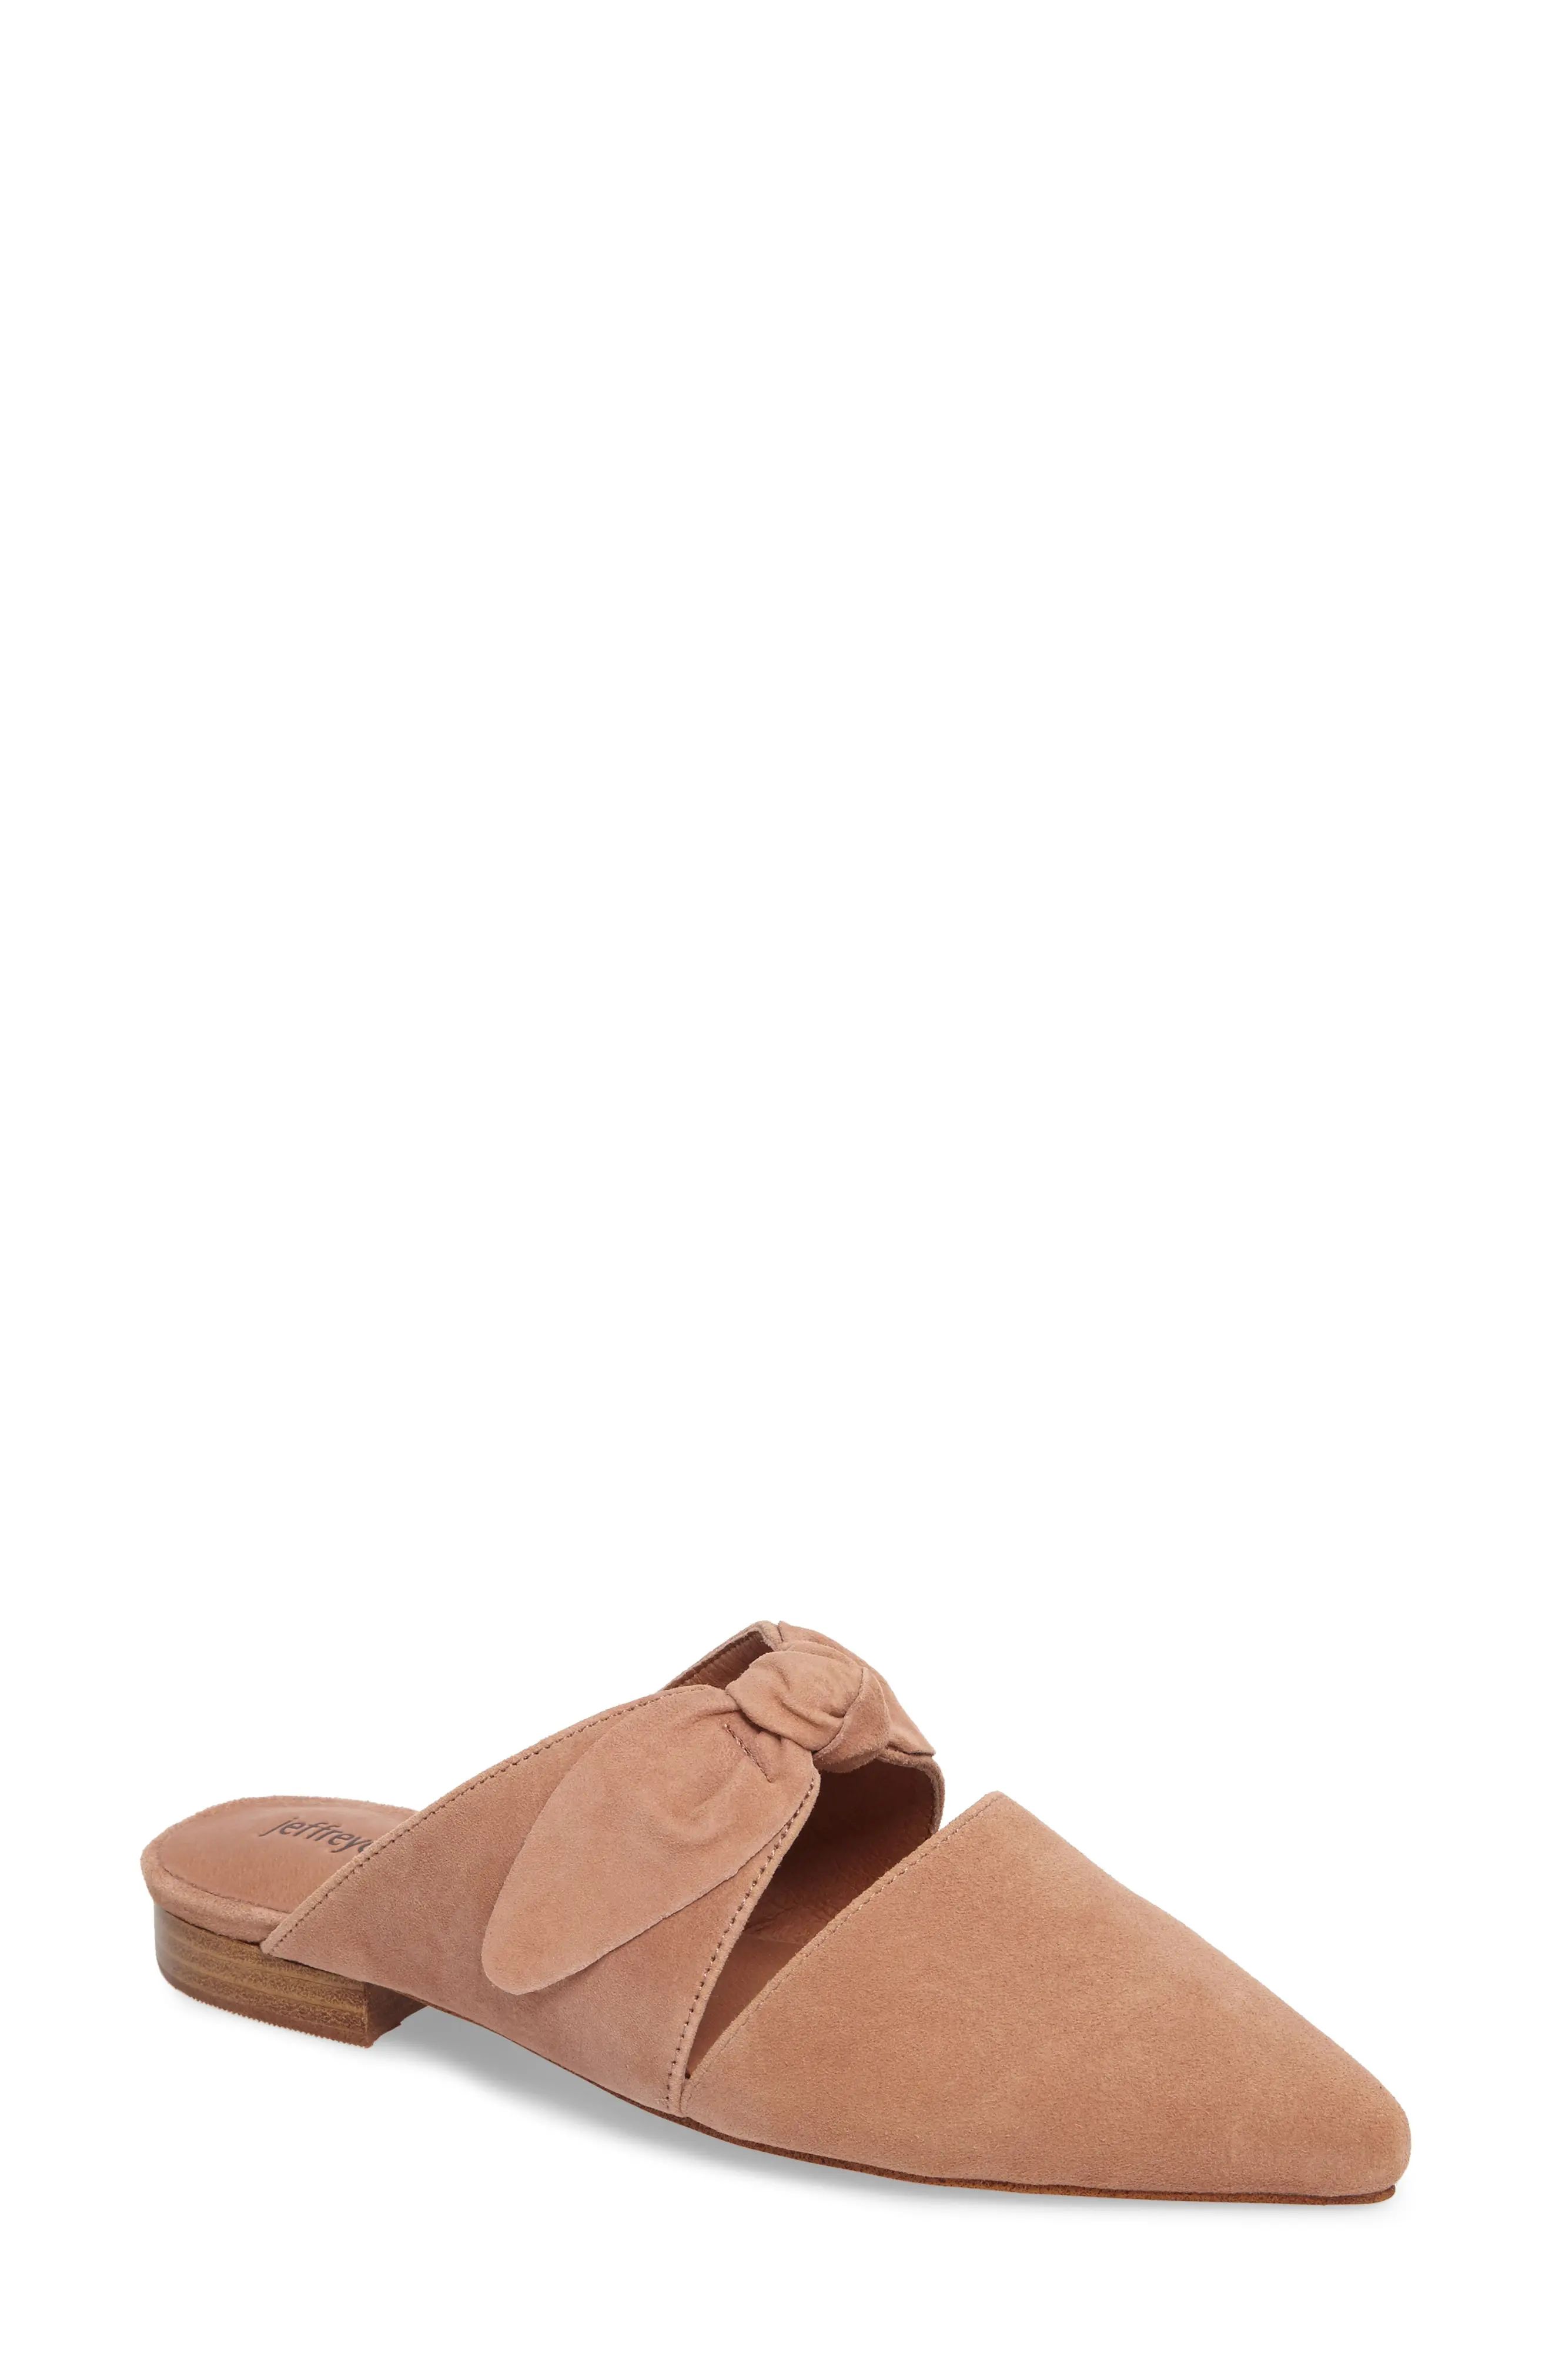 Jeffrey Campbell Charlin Bow Mule | Nordstrom